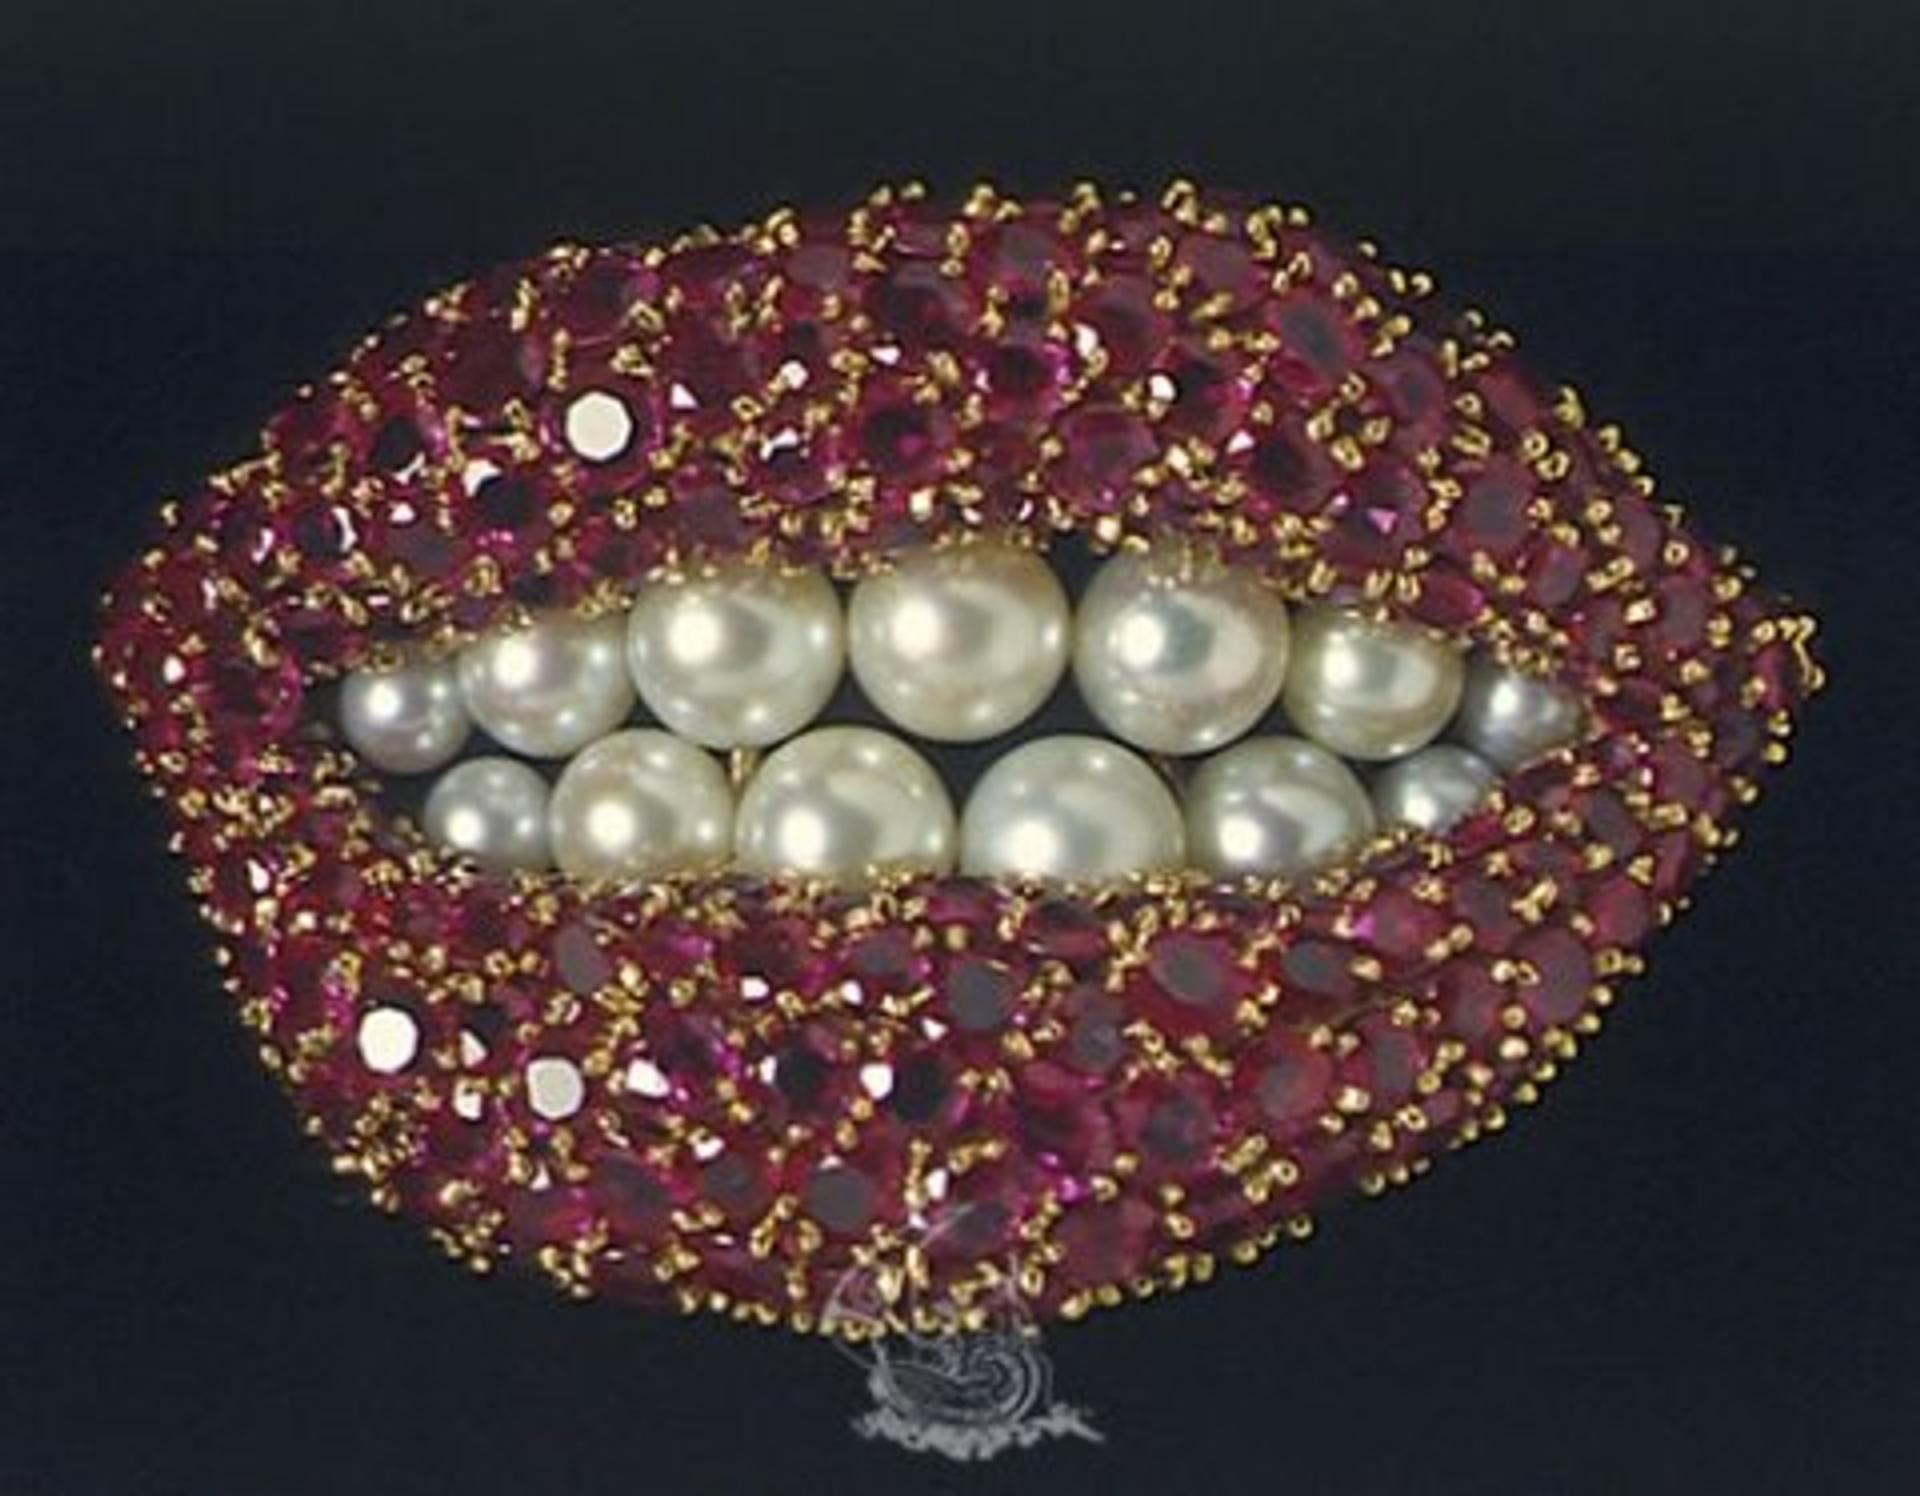 Salvador Dalí’s Ruby Lips. Rubies in the shape of a mouth with pearls as teeth.